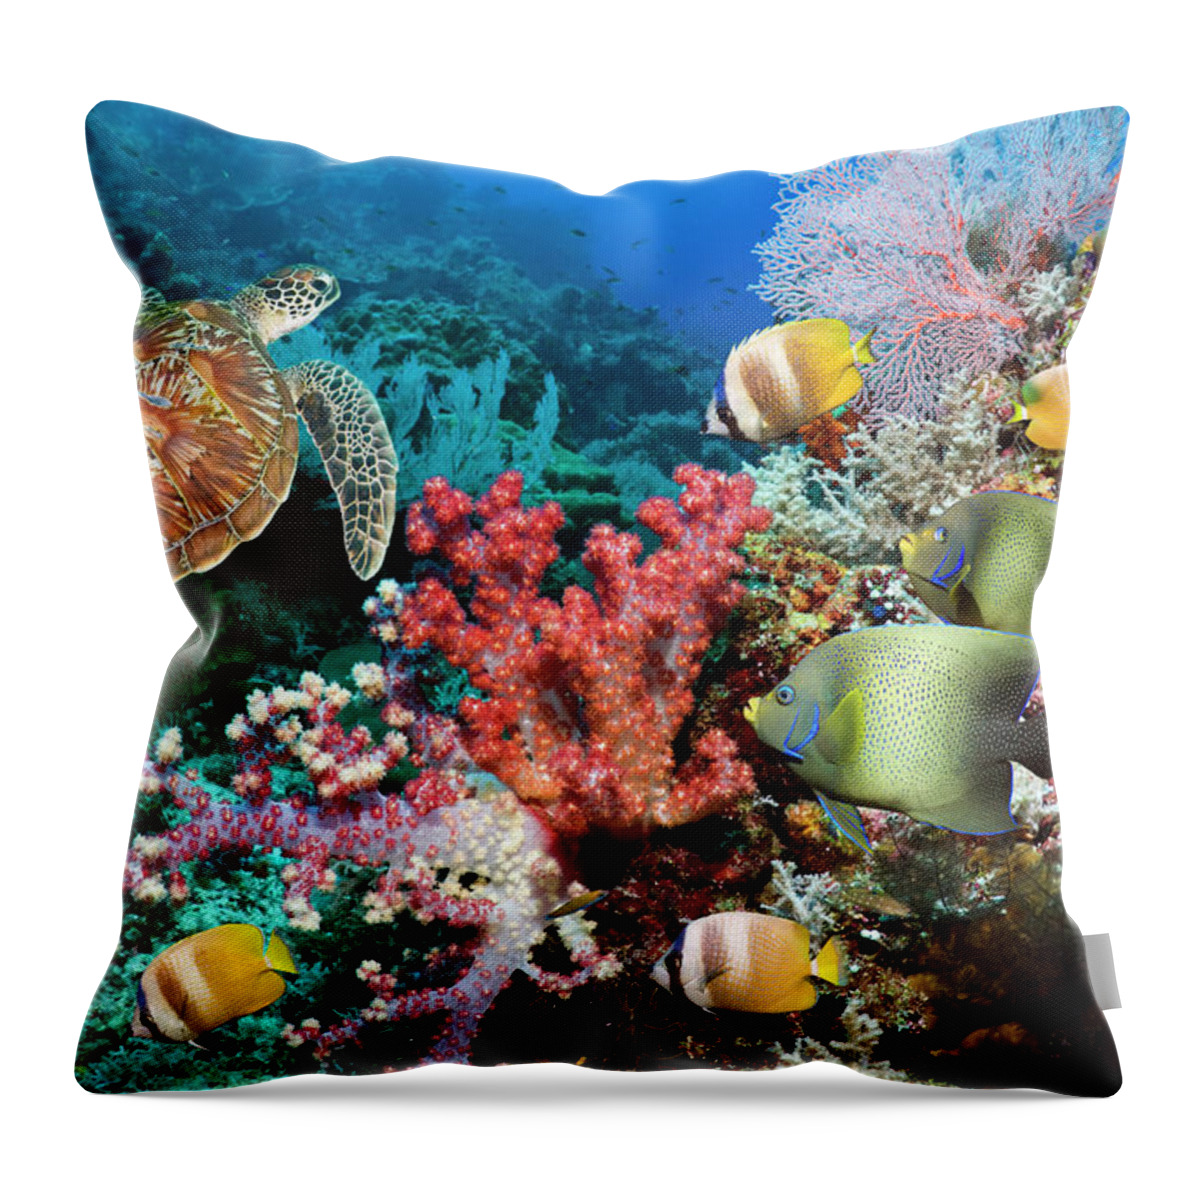 Tranquility Throw Pillow featuring the photograph Green Sea Turtle Over Coral Reef by Georgette Douwma